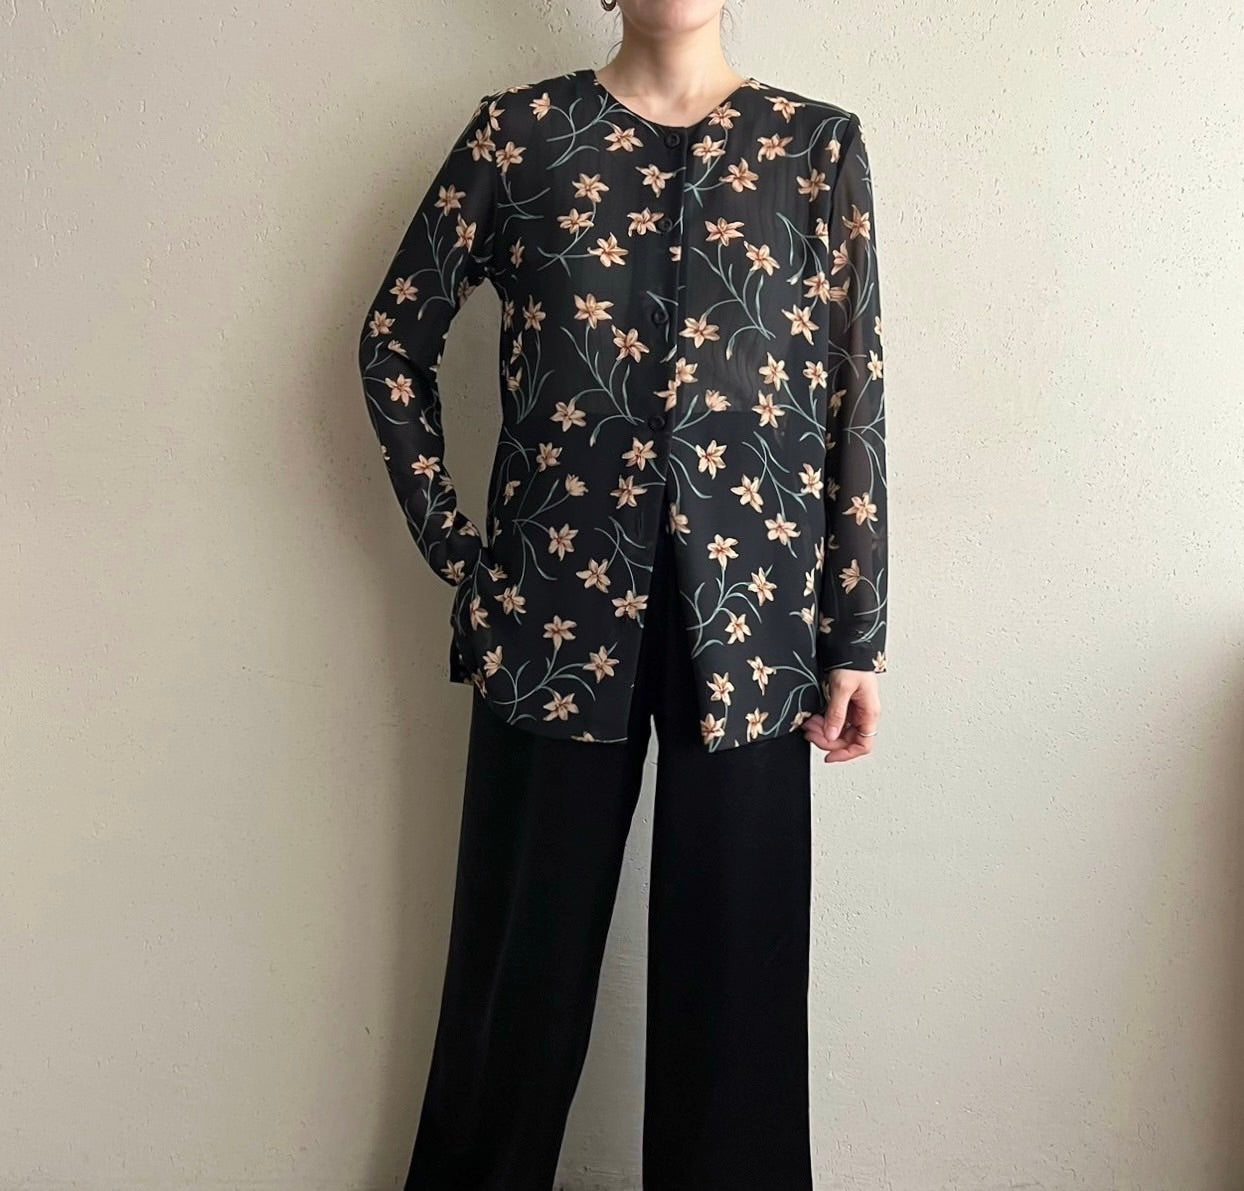 90s Sheer Printed Blouse Made in USA